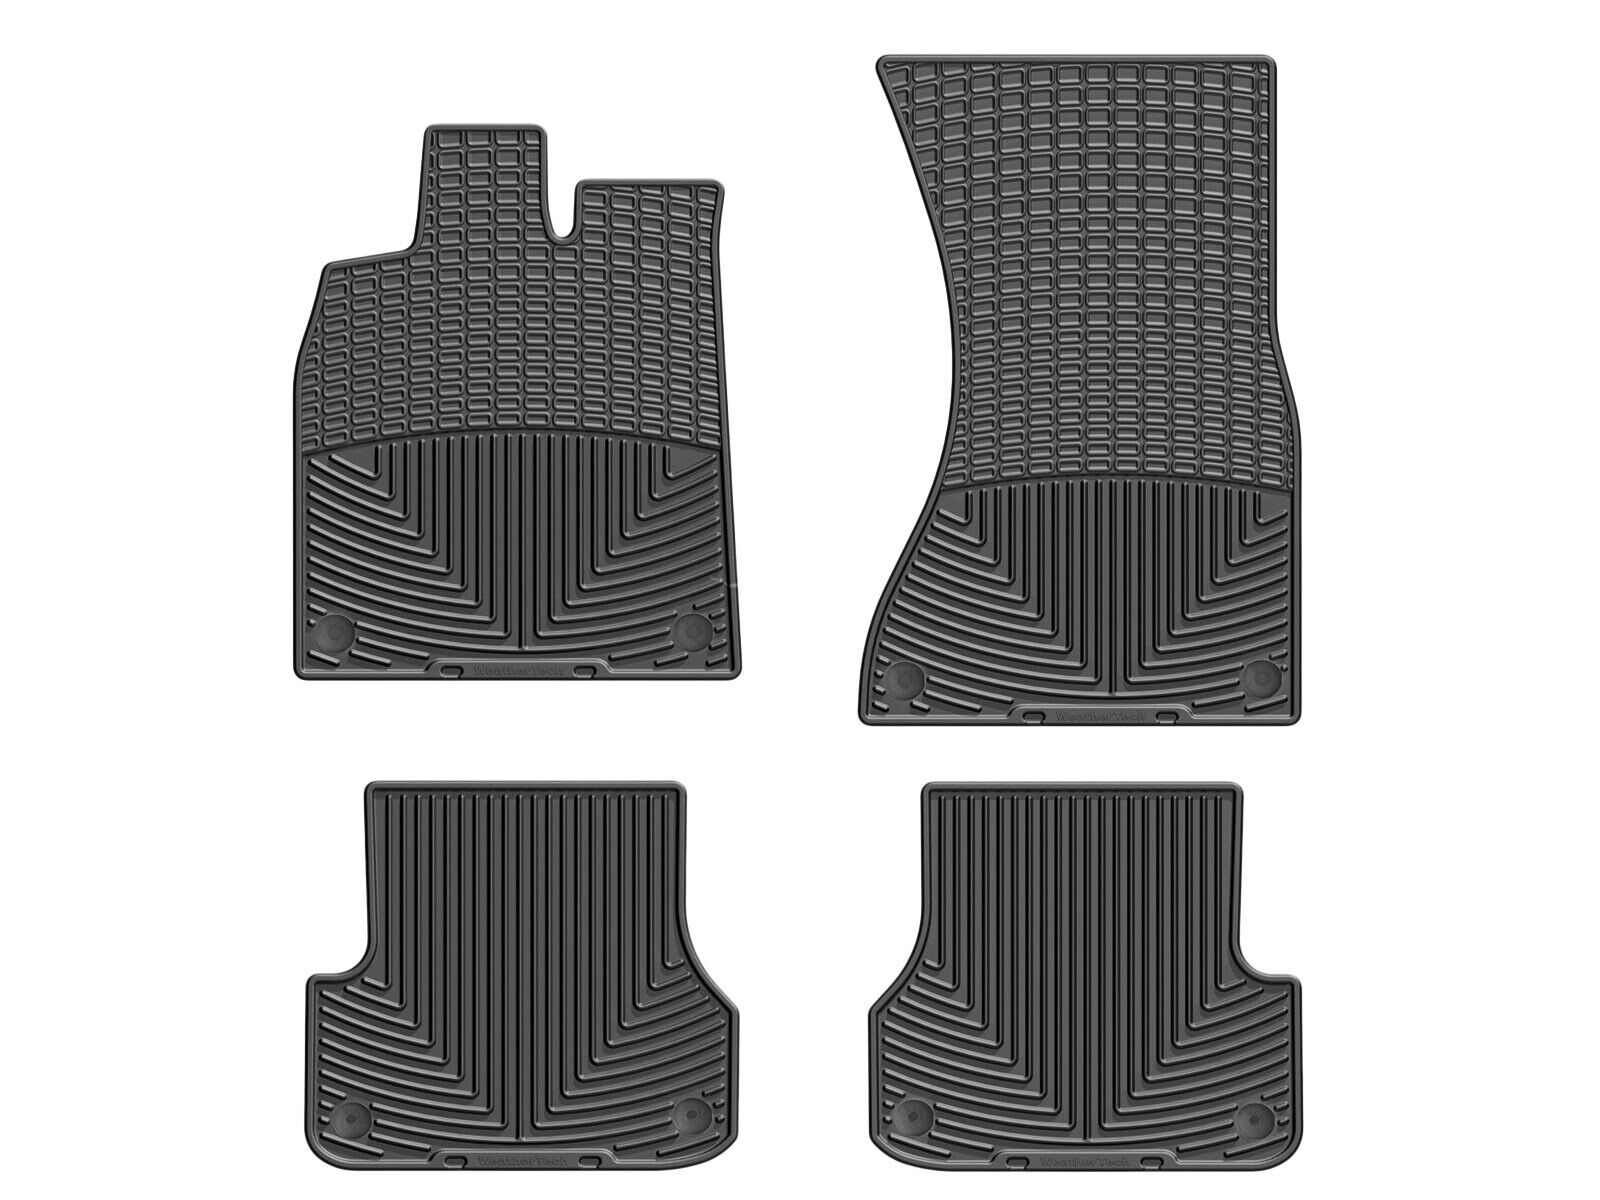 WeatherTech All-Weather Floor Mats for Audi A6/S6/A7/S7/RS7 1st & 2nd Row, Black